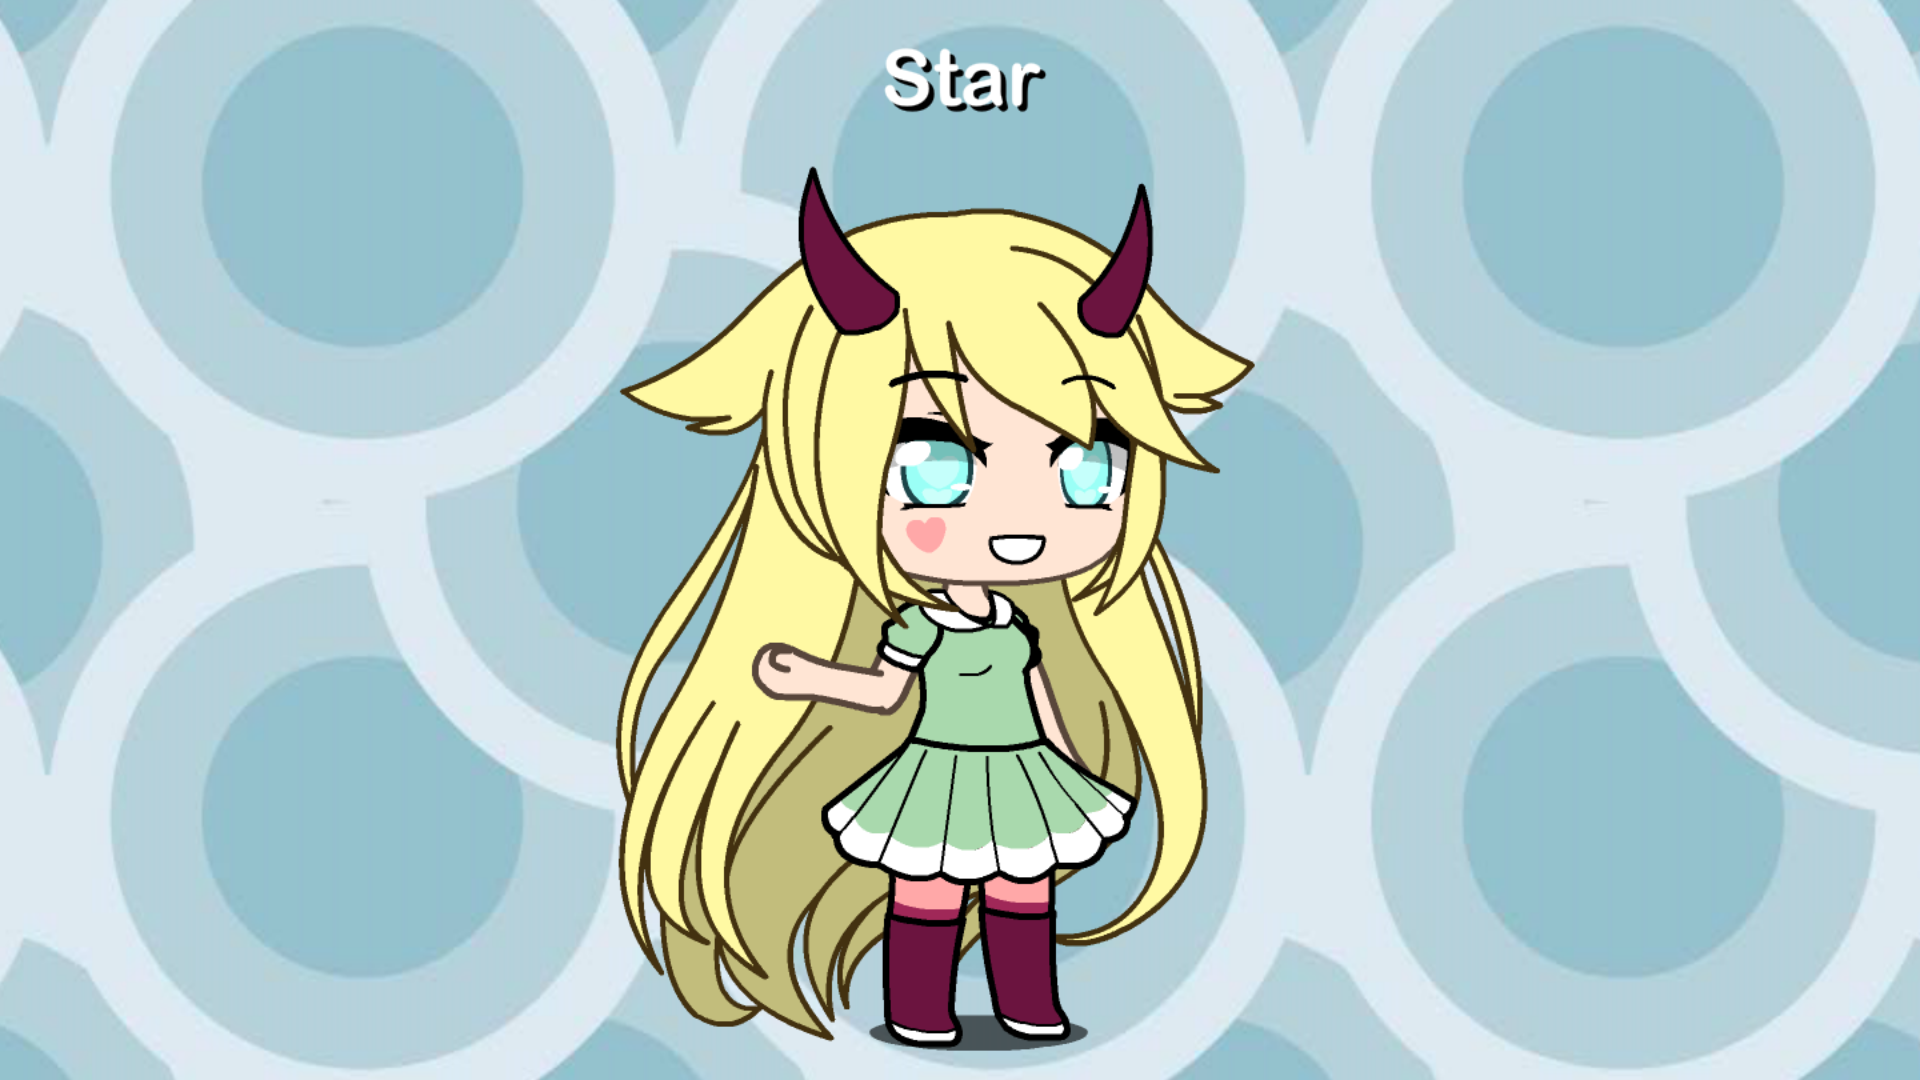 Post by Starciph3r in Gacha World comments 